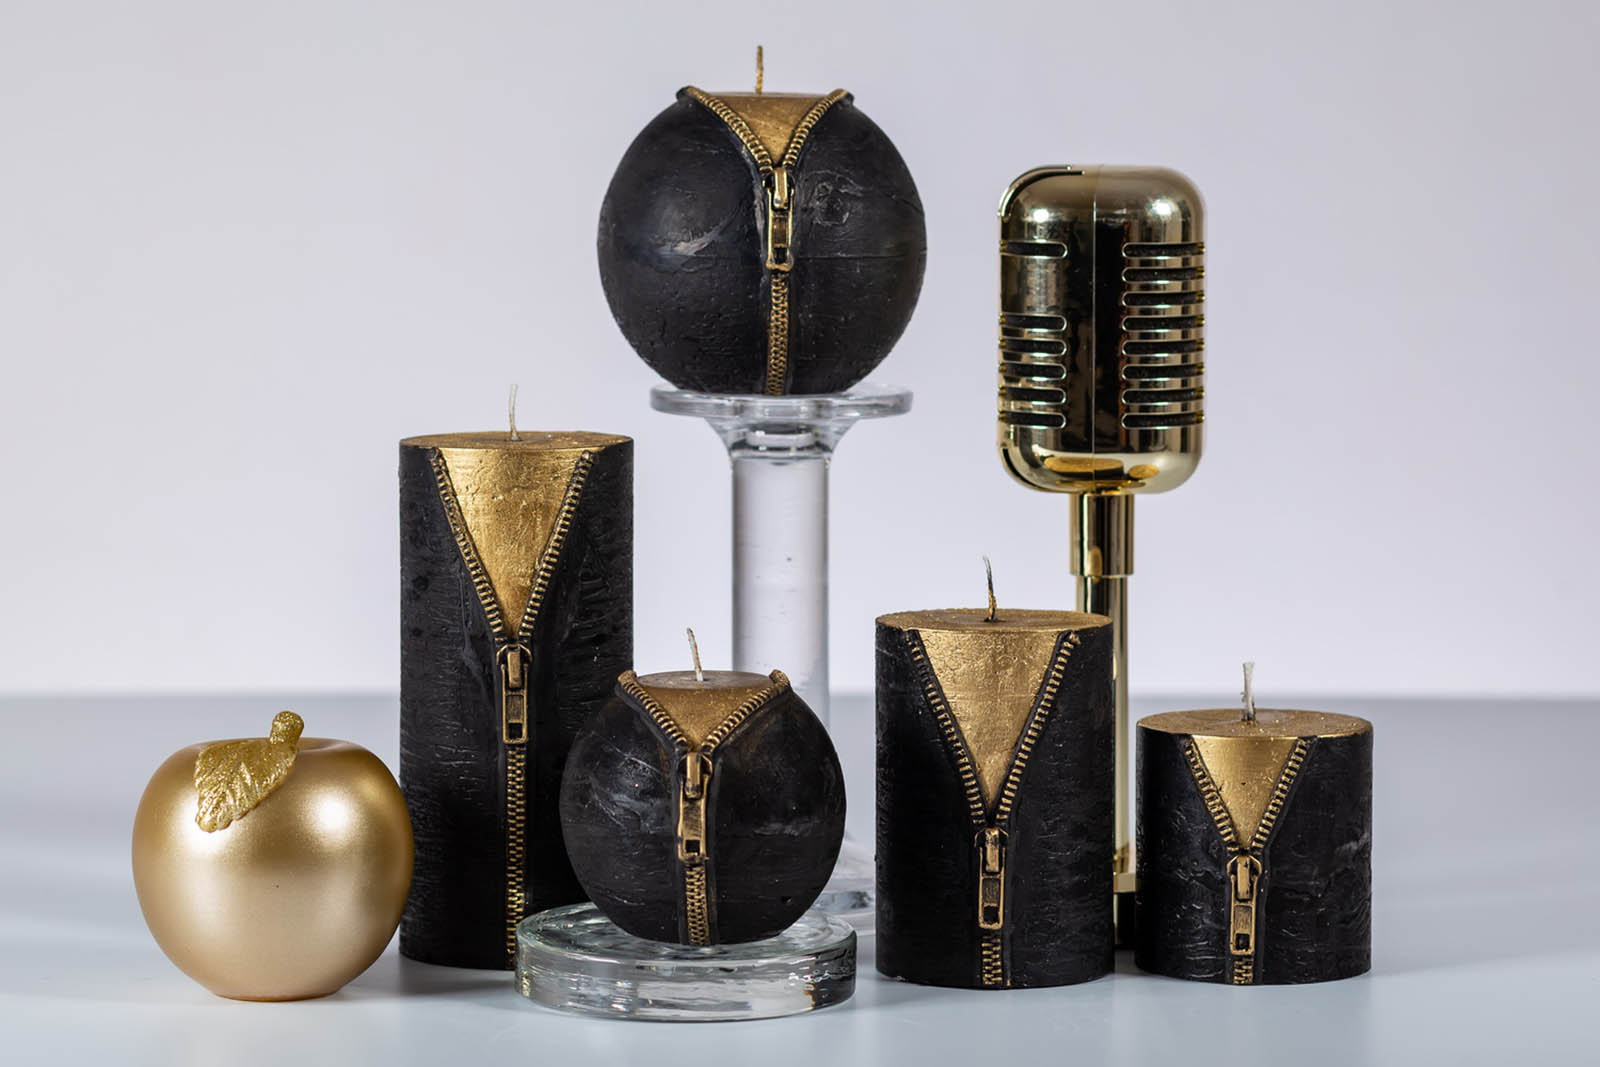 Five black and gold rustic candles with zipper sitting on the beige tabletop beside golden microphone and apple